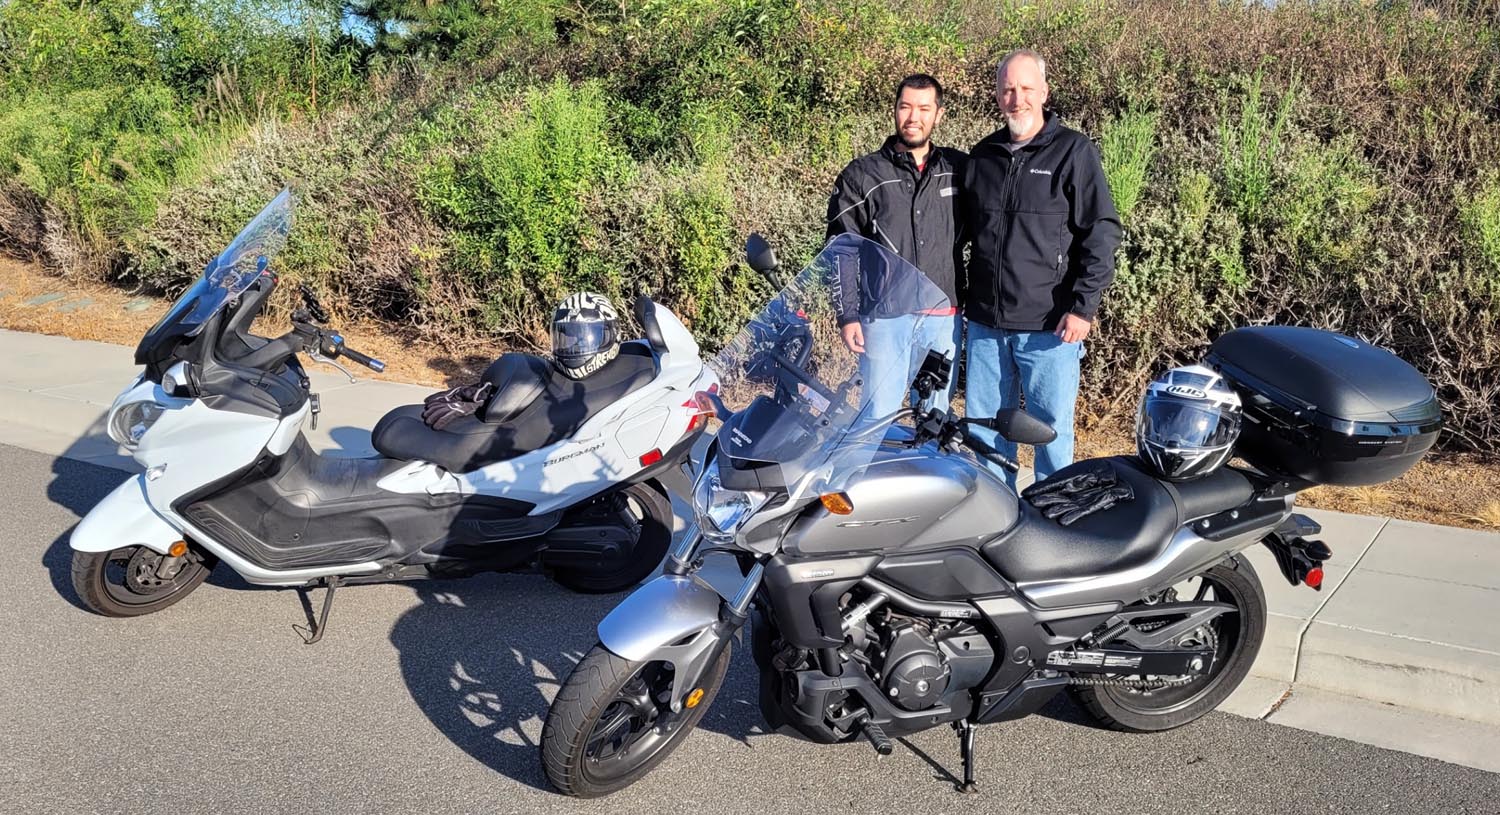 For Father and Son, Scooters Were the Spark - Motorcycle Safety ...